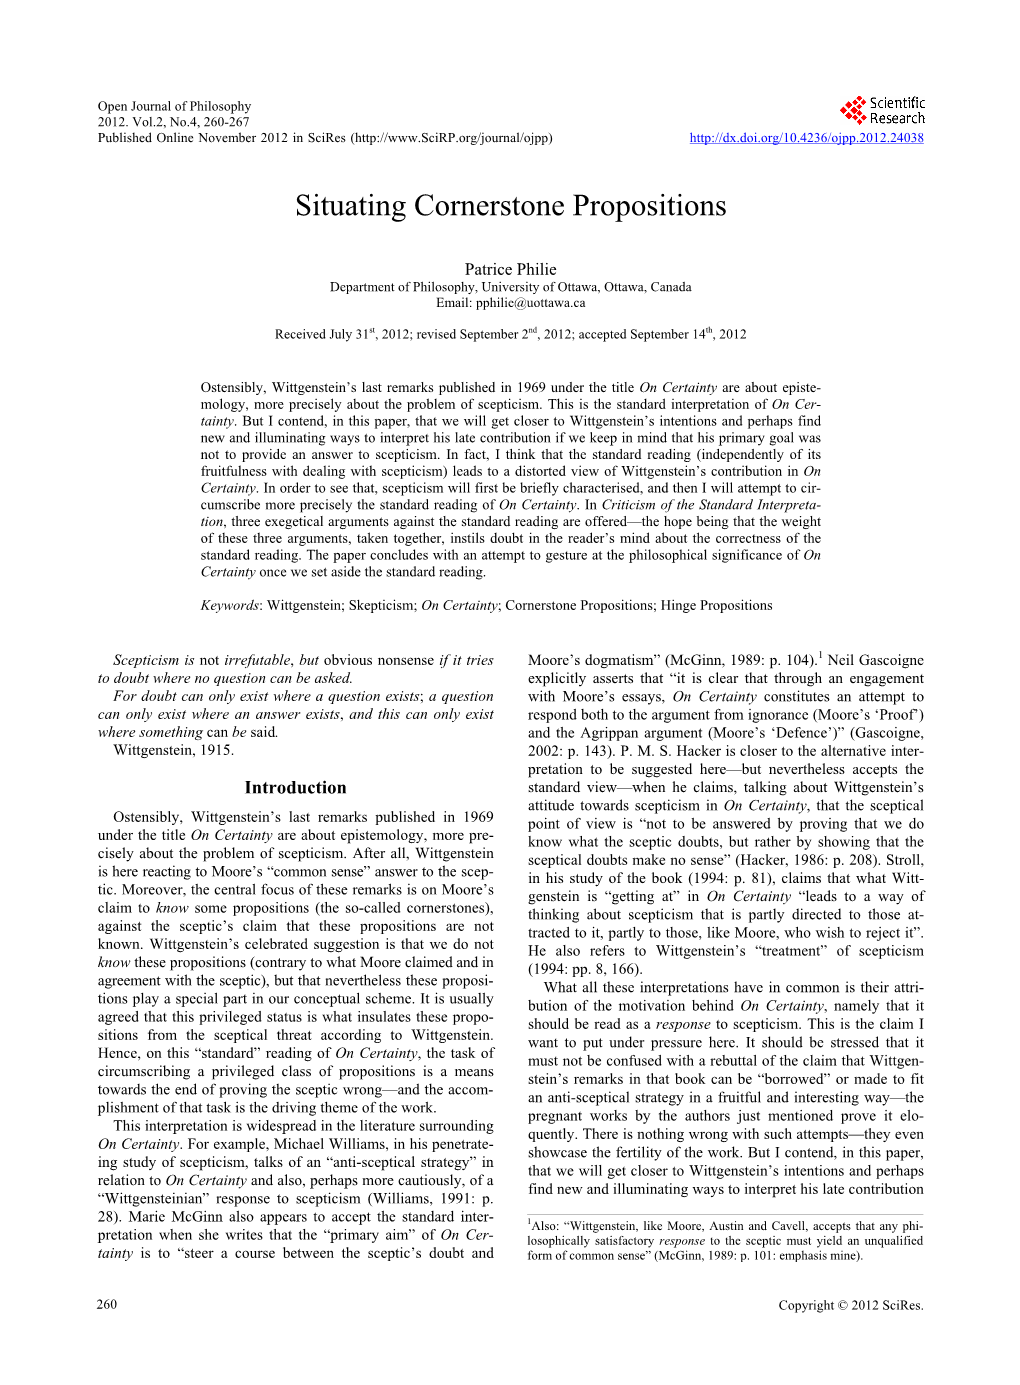 Situating Cornerstone Propositions